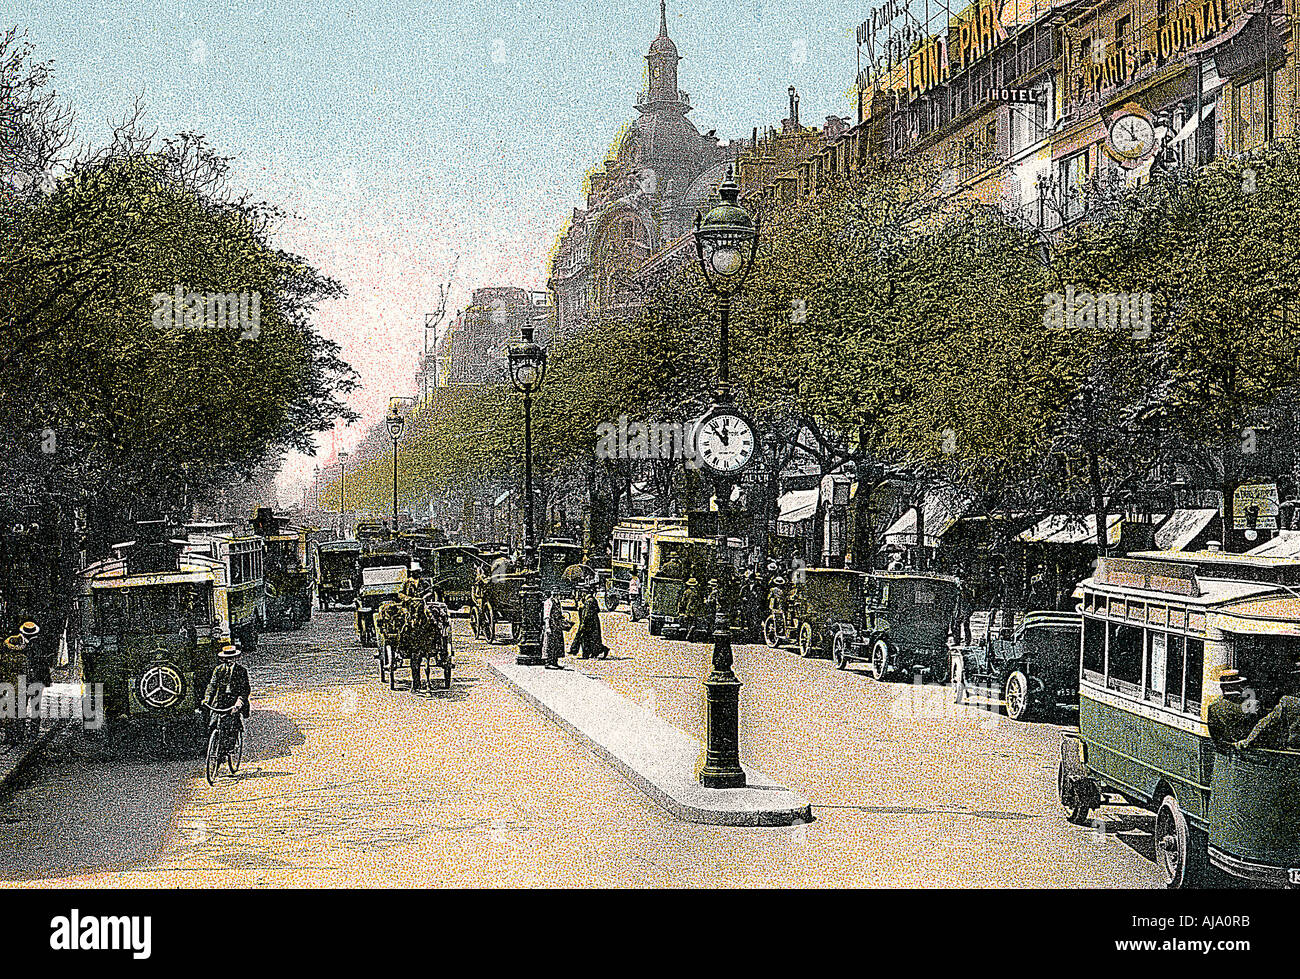 Boulevard des Italiens, Paris, with cars and motor buses on the street, c1900. Artist: Unknown Stock Photo